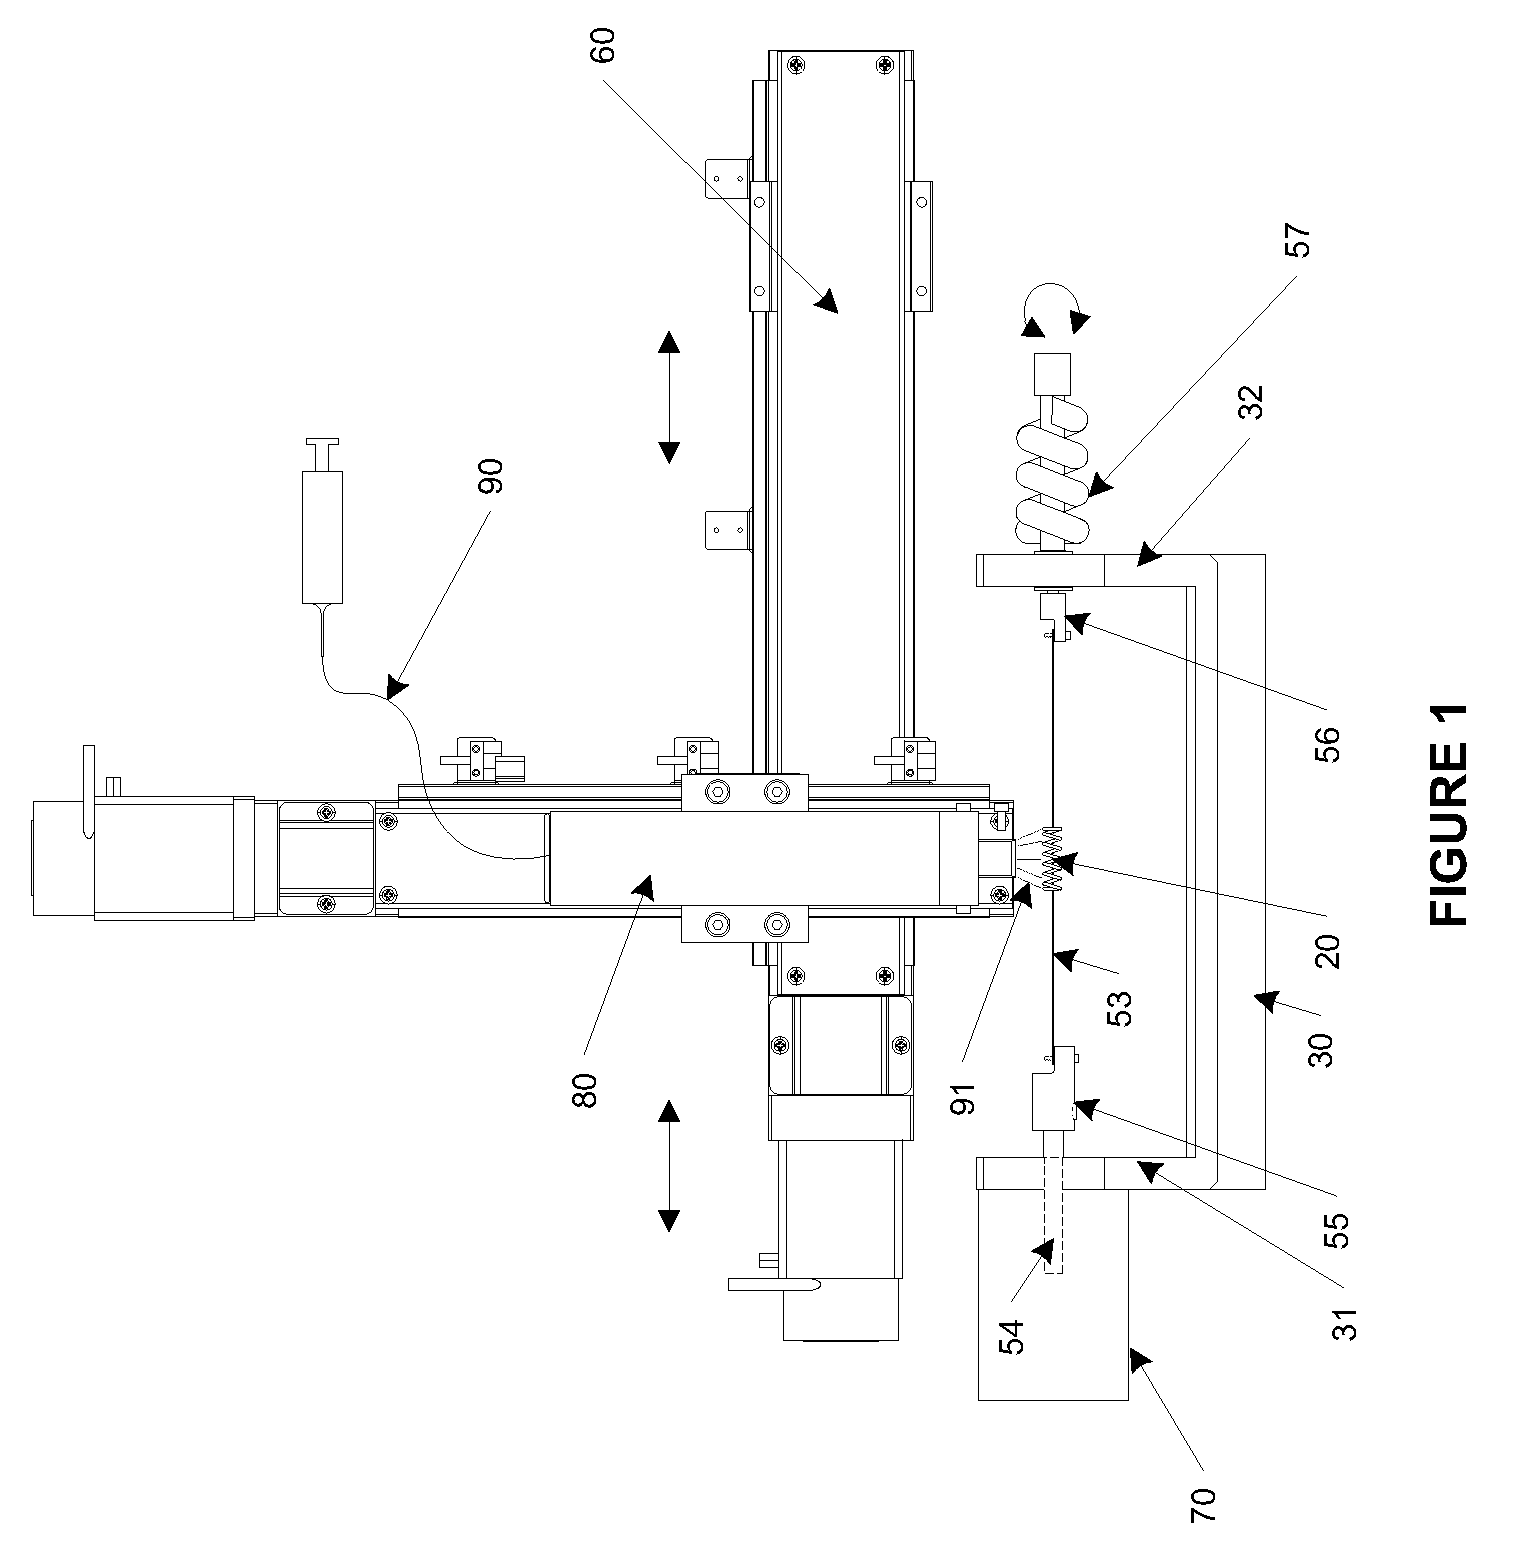 Apparatus for Holding a Medical Device During Coating